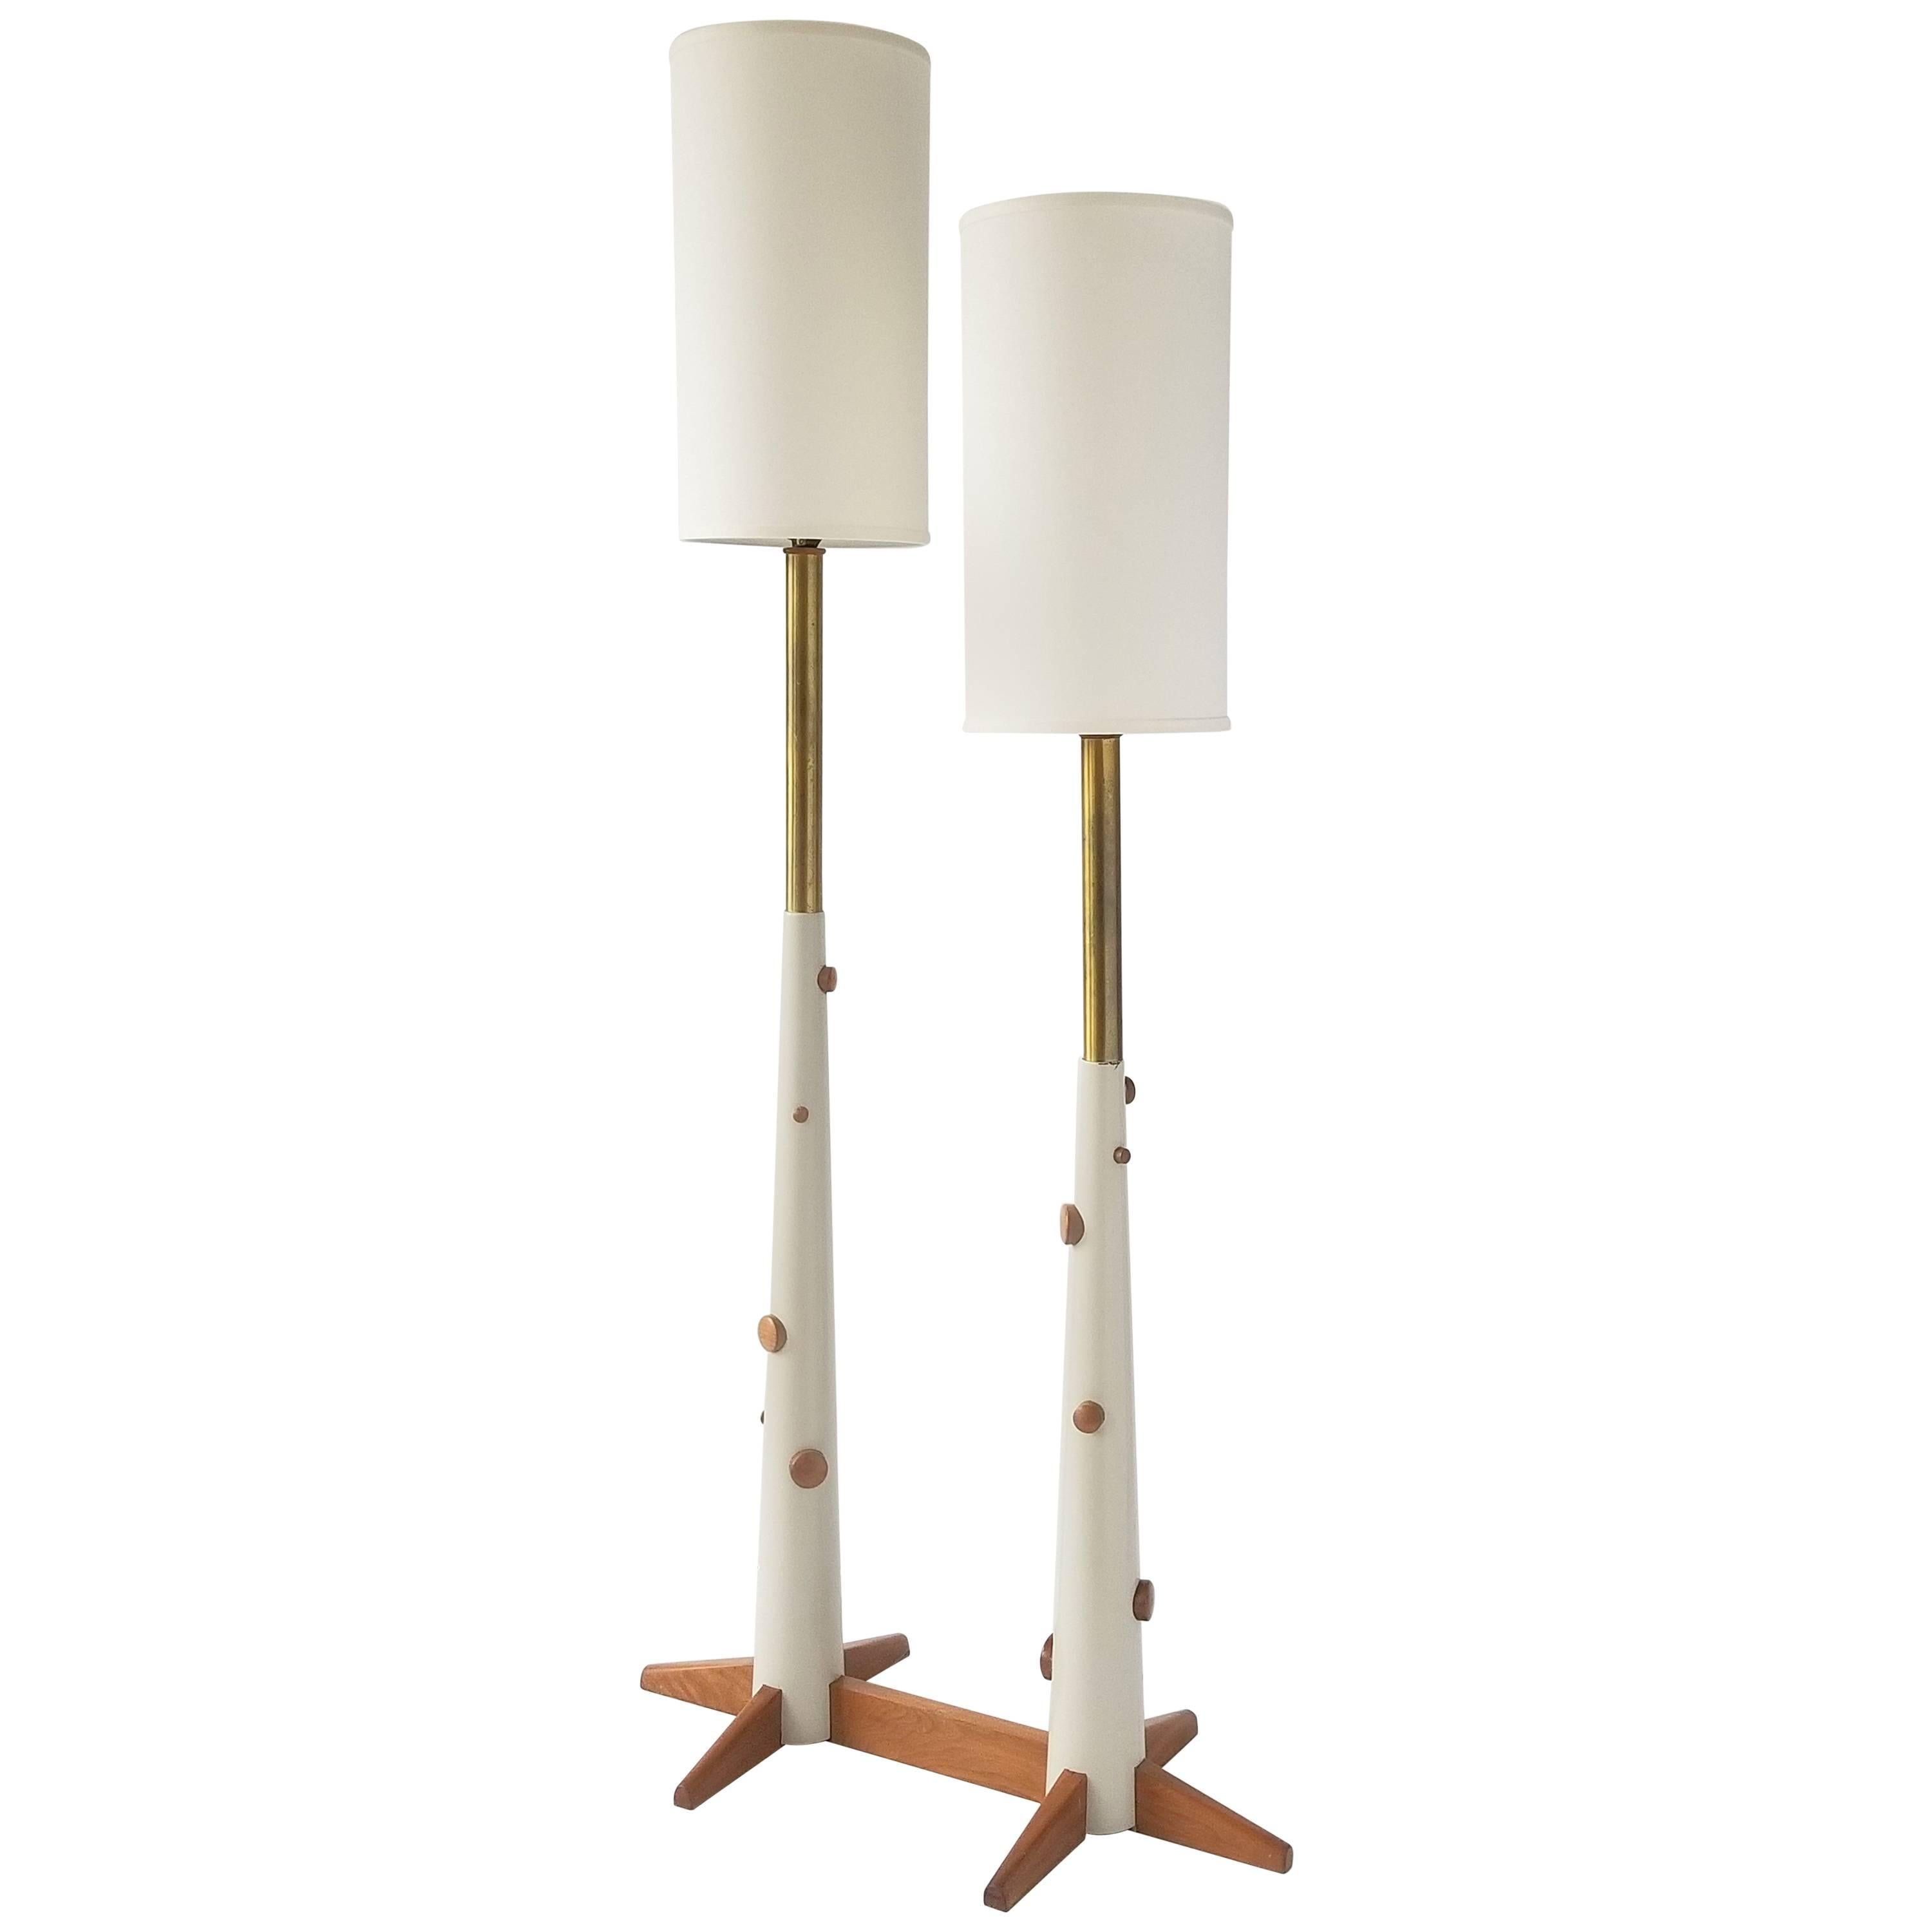 1960s Twin Pole Floor Lamp in Lacquered Wood and Brass , USA